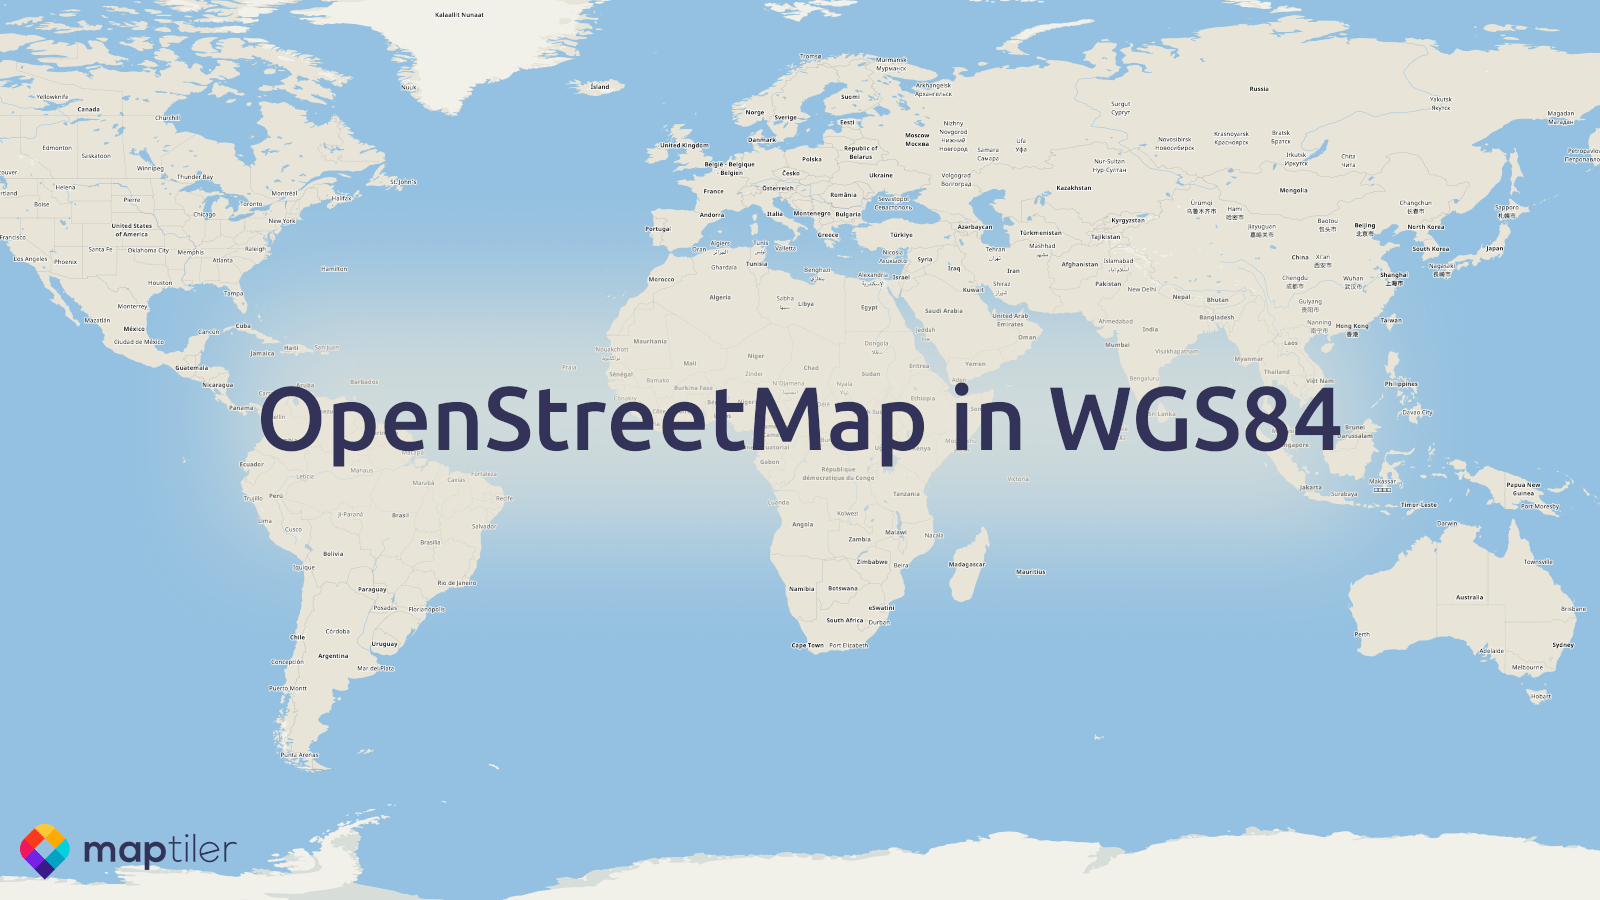 OpenStreetMap in WGS84 image